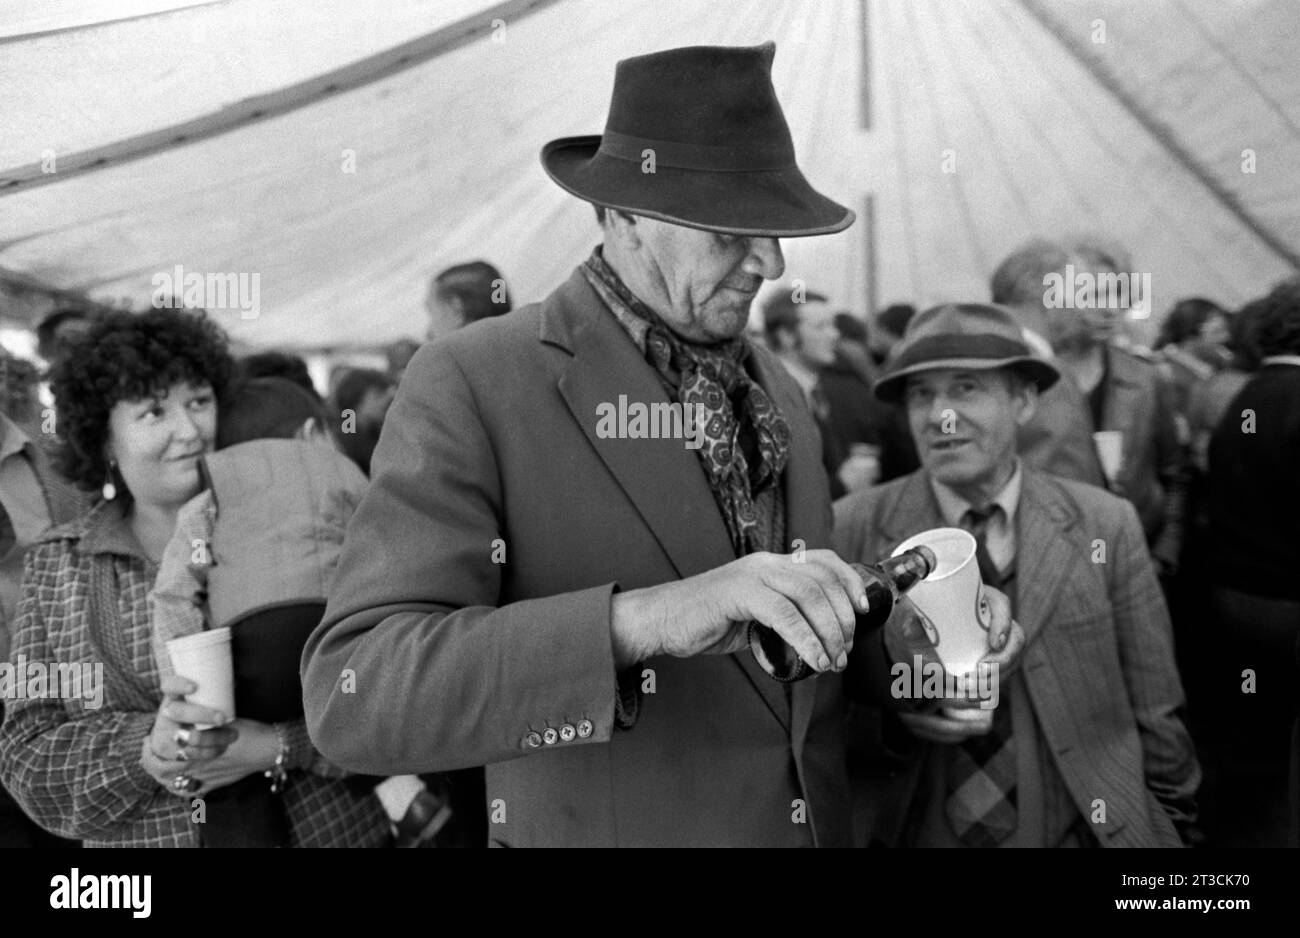 Beer tent, its crowded gypsy men drinking at the end of a day. Appleby in Westmorland gypsy horse fair Cumbria, England June 1981 1980s  UK HOMER SYKES Stock Photo